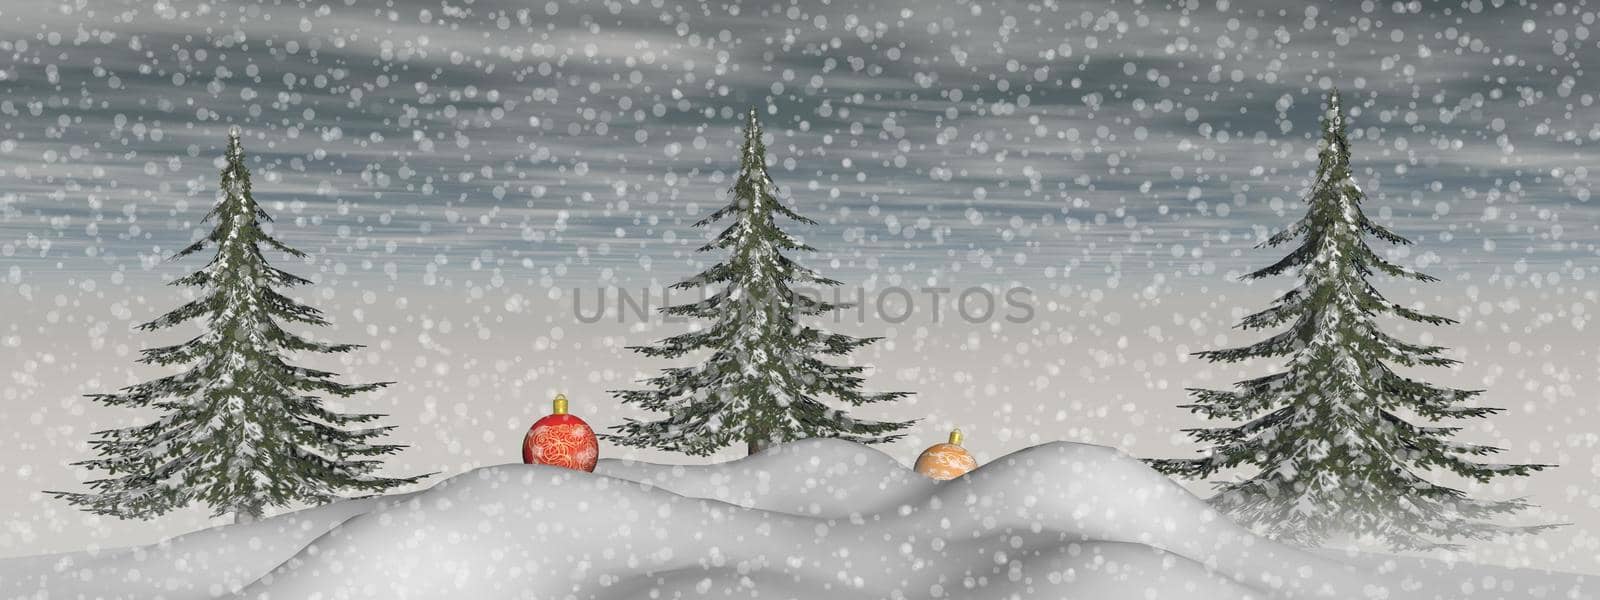 very nice view of Christmas trees and balls - 3d rendering by mariephotos